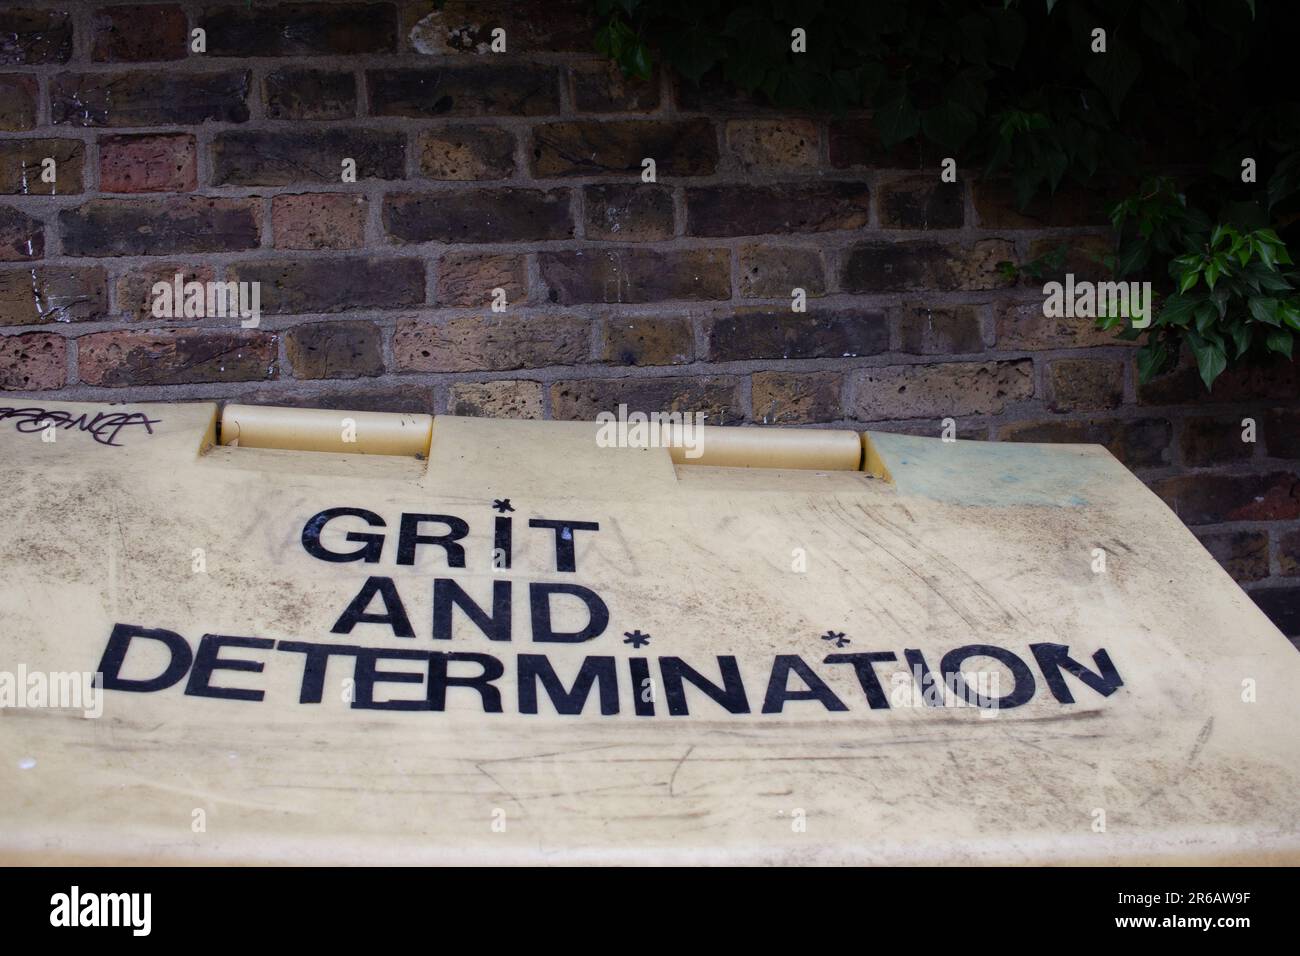 A local council roadside gritting bin, photographed in Haringey, London. After the word 'Grit' is added 'and determination' Stock Photo